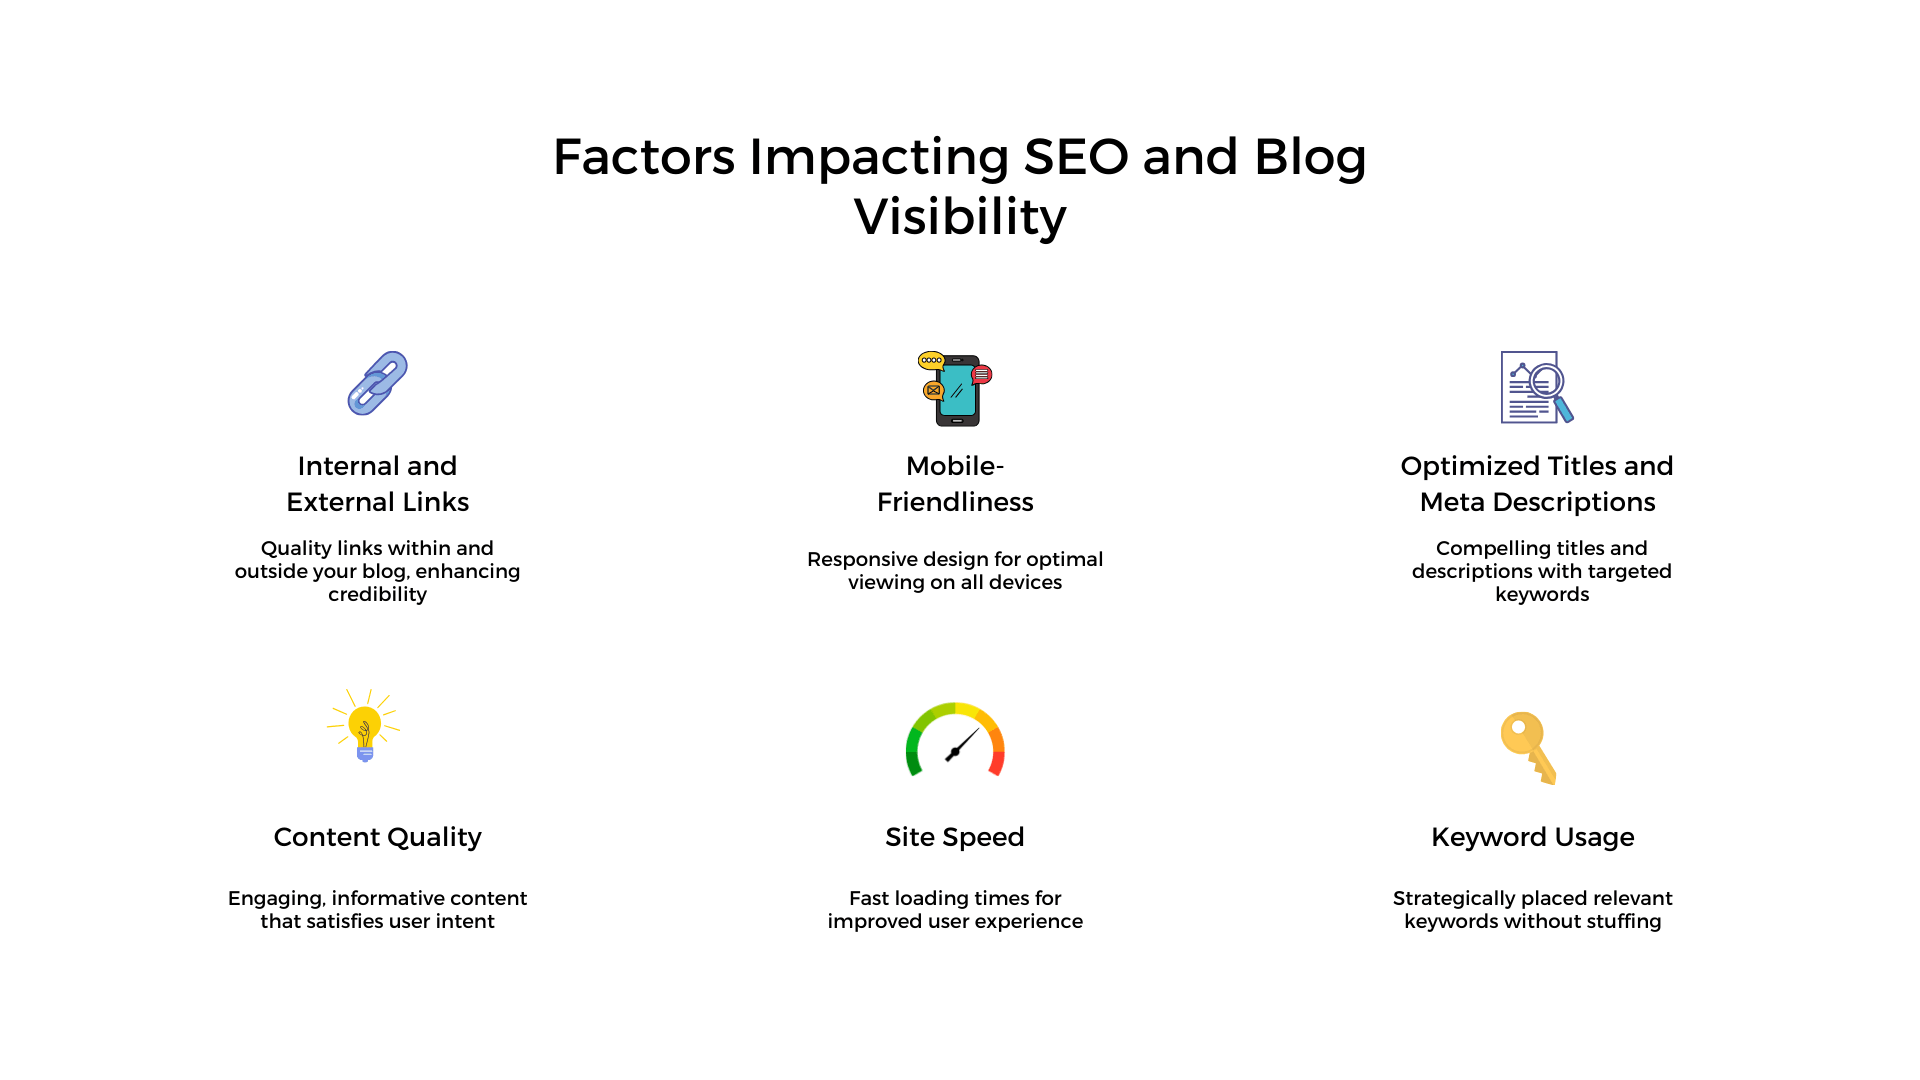 factors that impact seo and blog visibility including quality content, site speed, optimization, and mobile friendliness